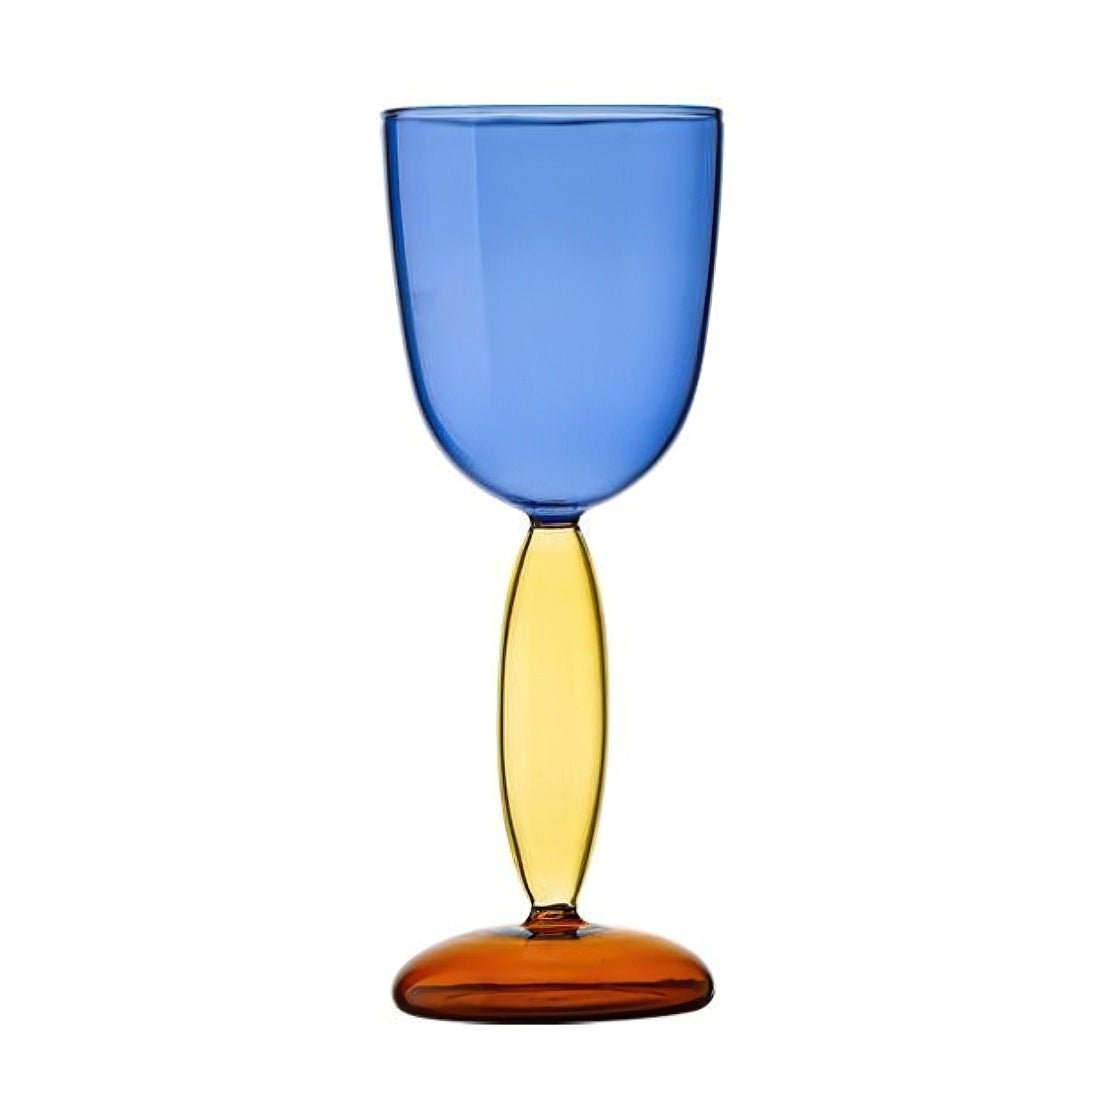 Blue glass goblet with yellow stem and amber bottom.